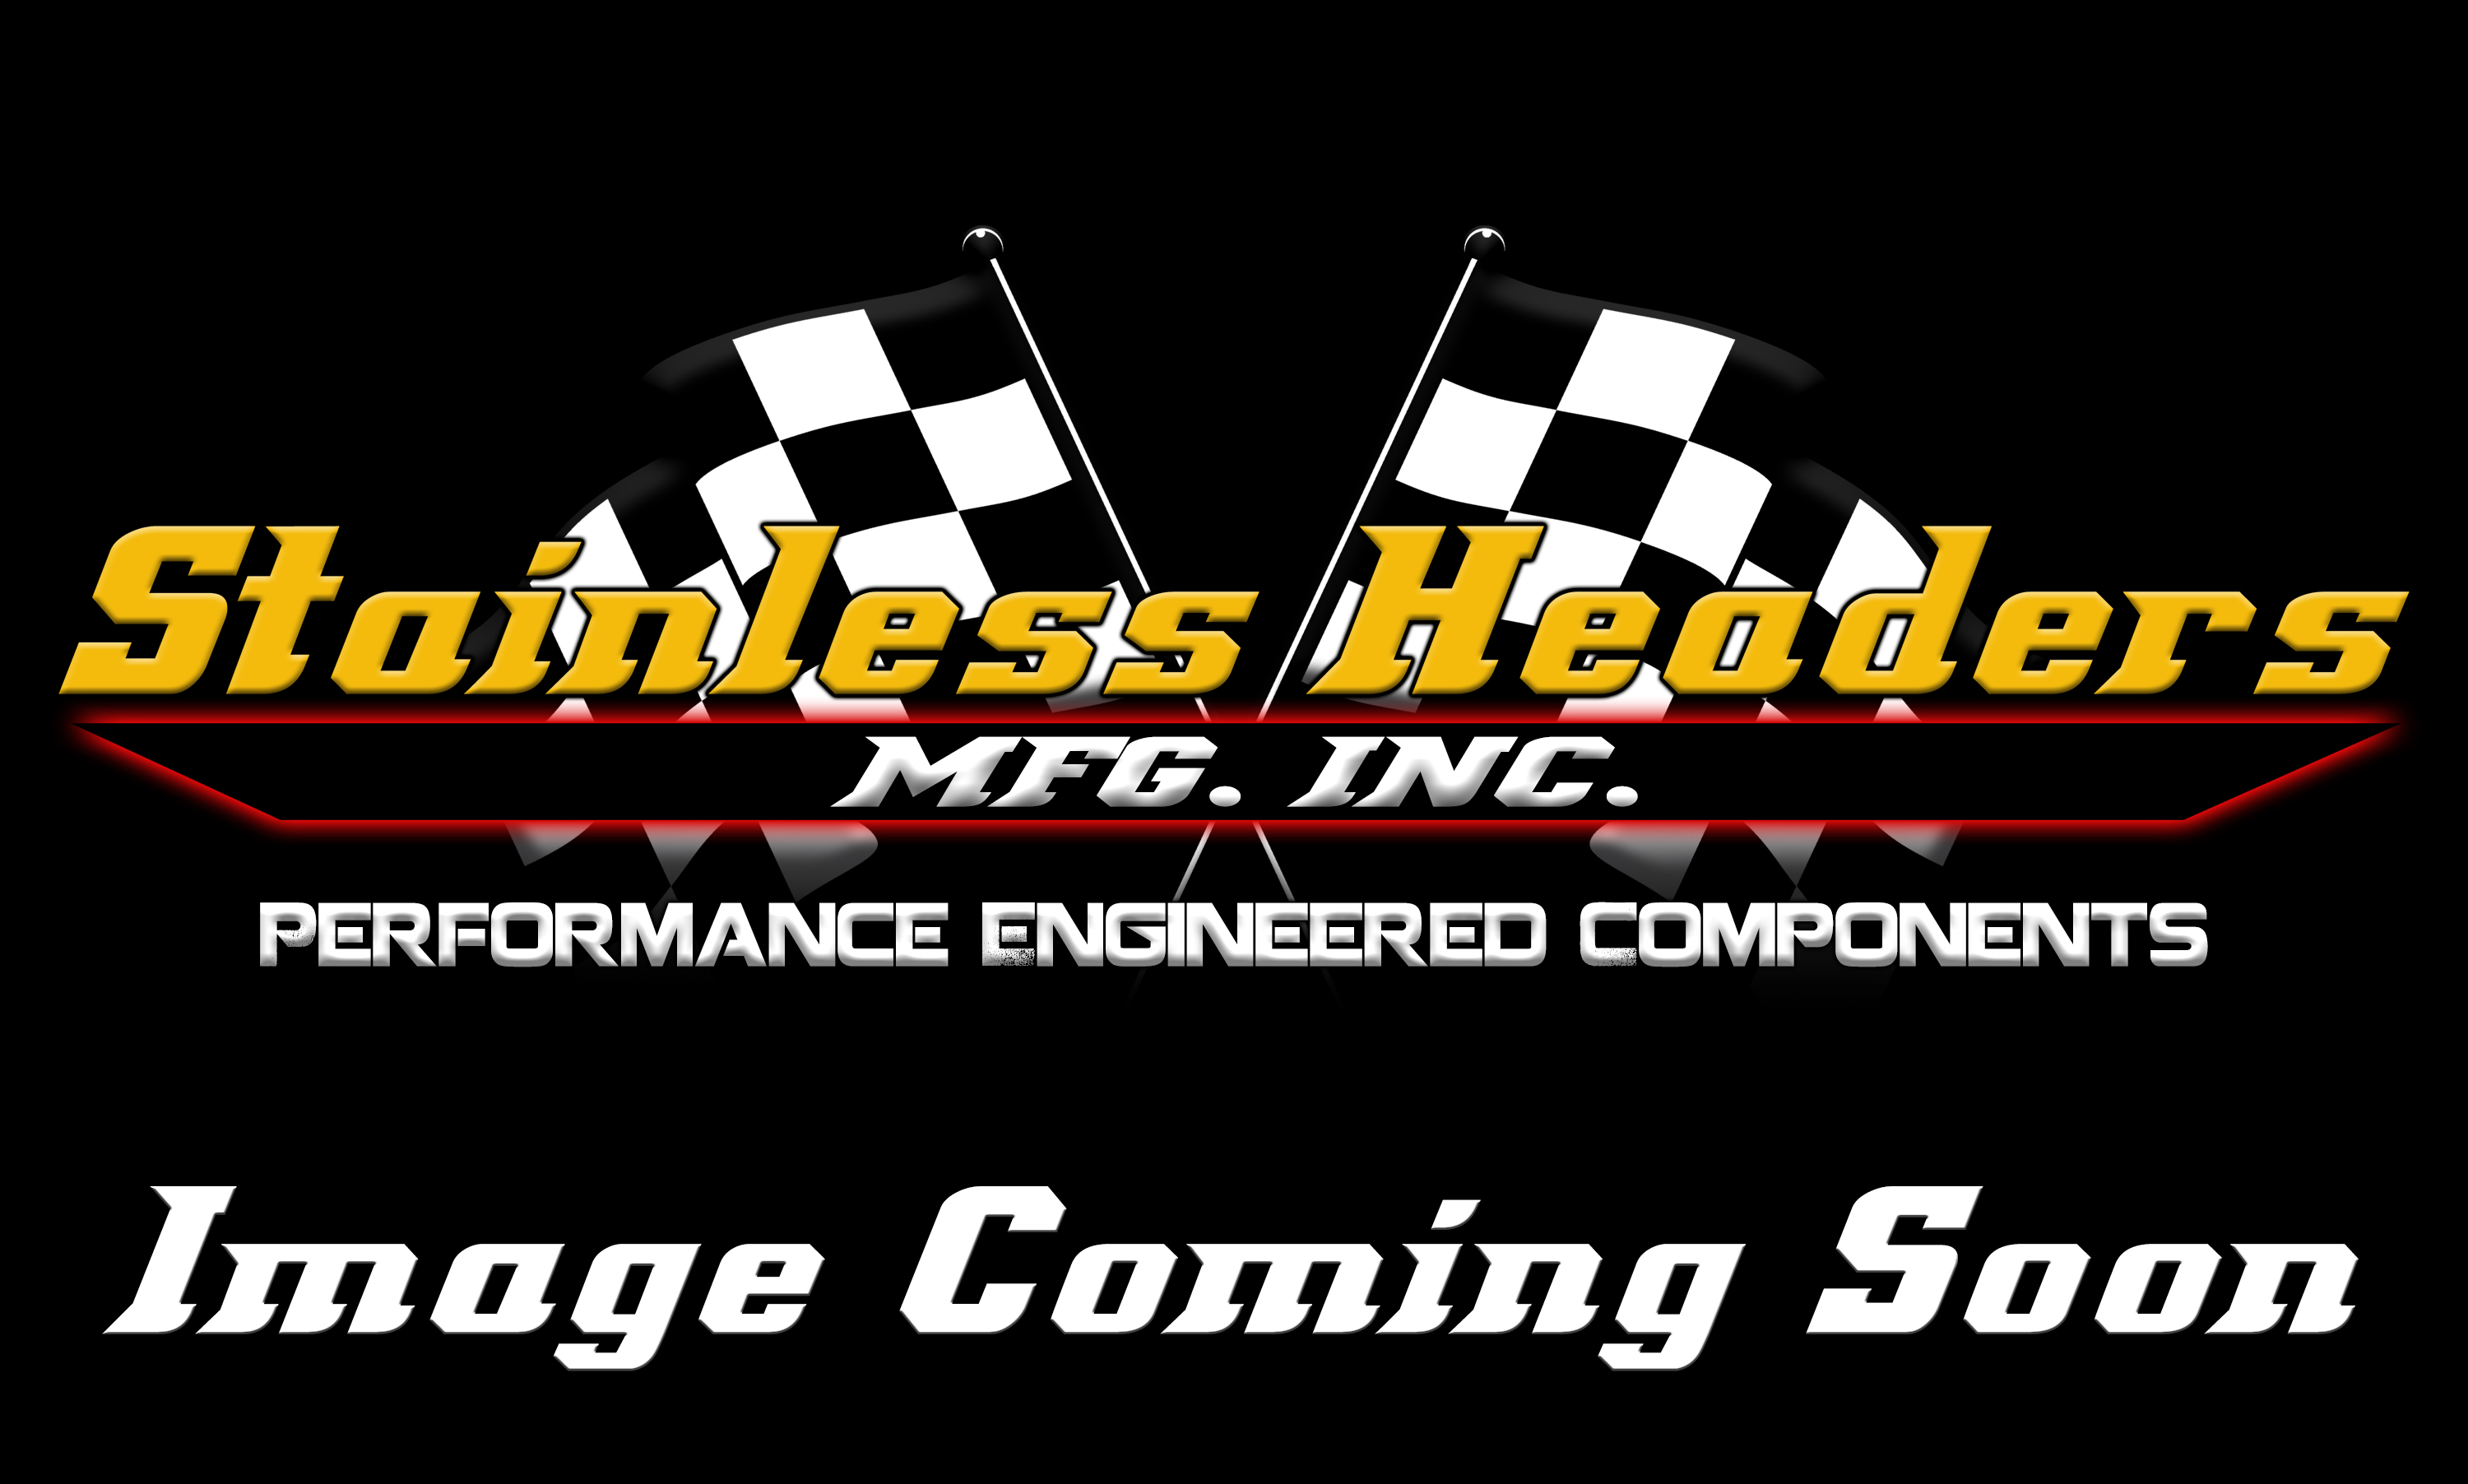 Stainless Headers - 2 1/2" Primary 8 into 1 Performance Merge Collector-16ga 304ss - Image 1